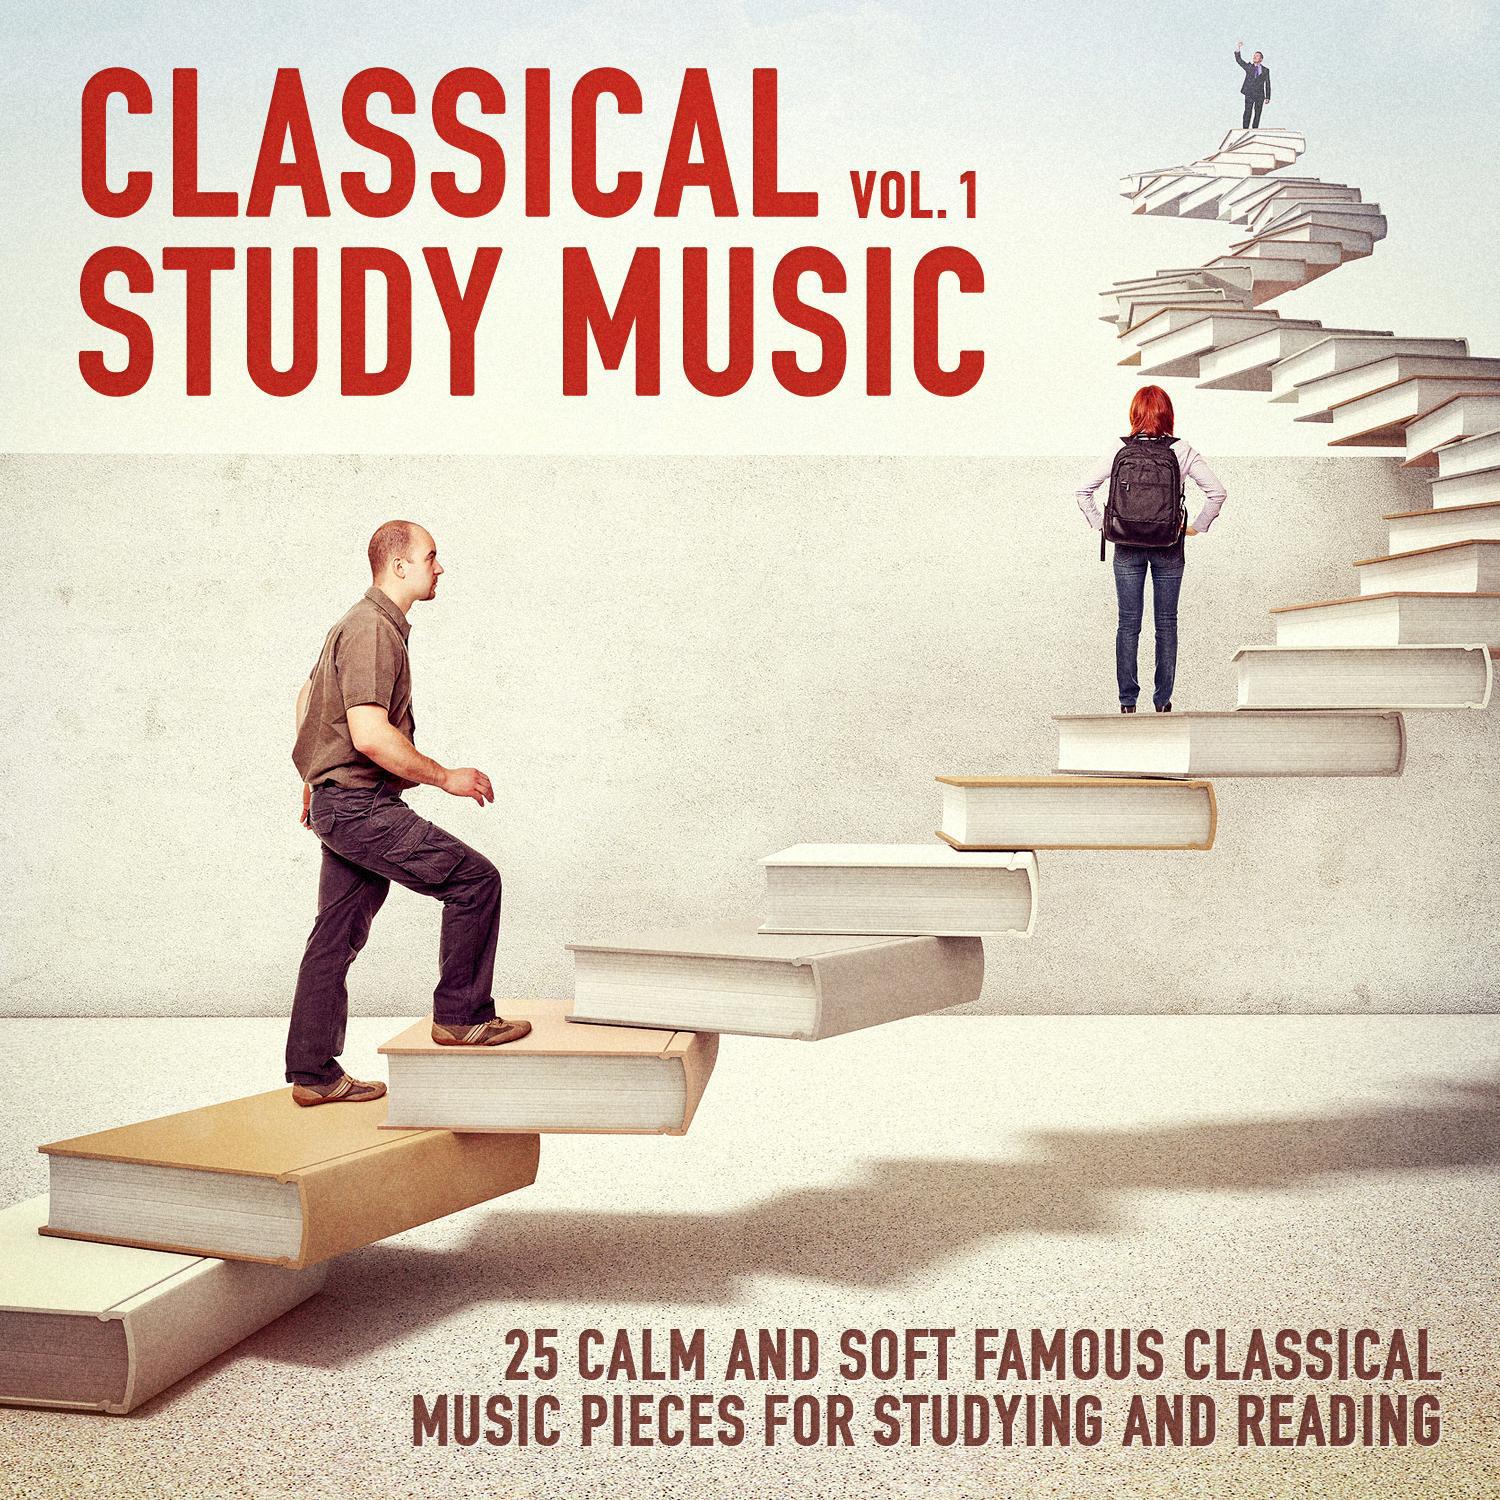 Classical Study Music, Vol. 1 (25 Calm and Soft Famous Classical Music Pieces for Studying and Reading)